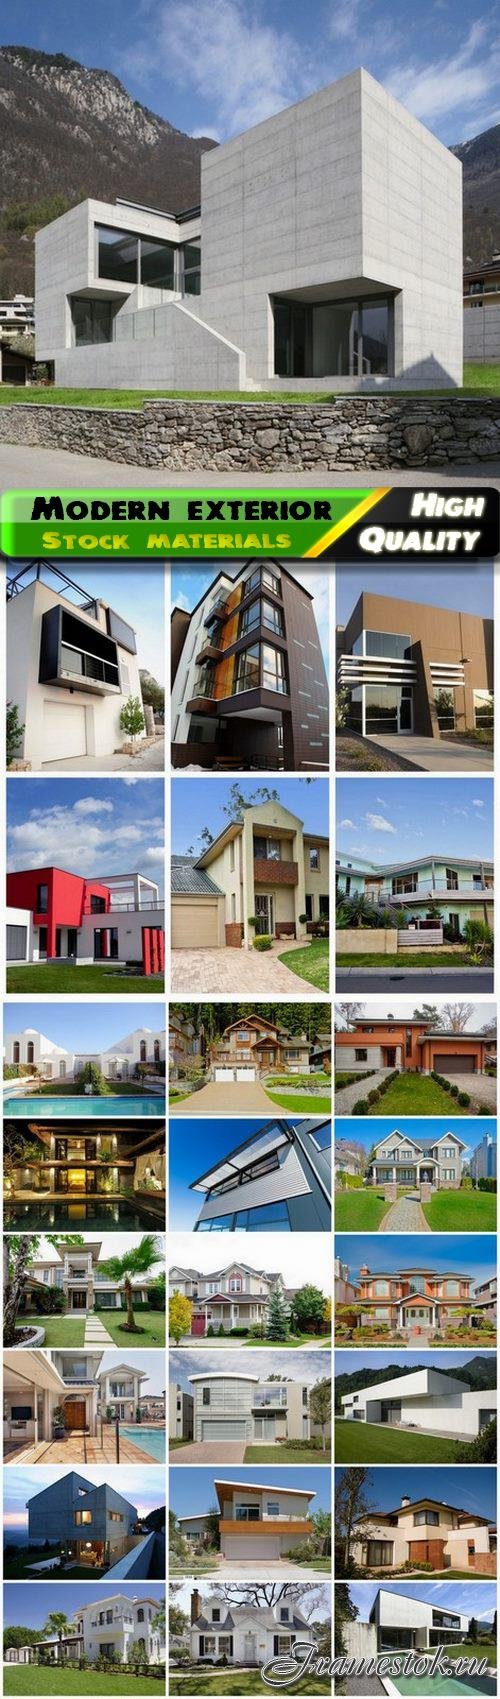 Modern exterior of country house - 25 HQ Jpg